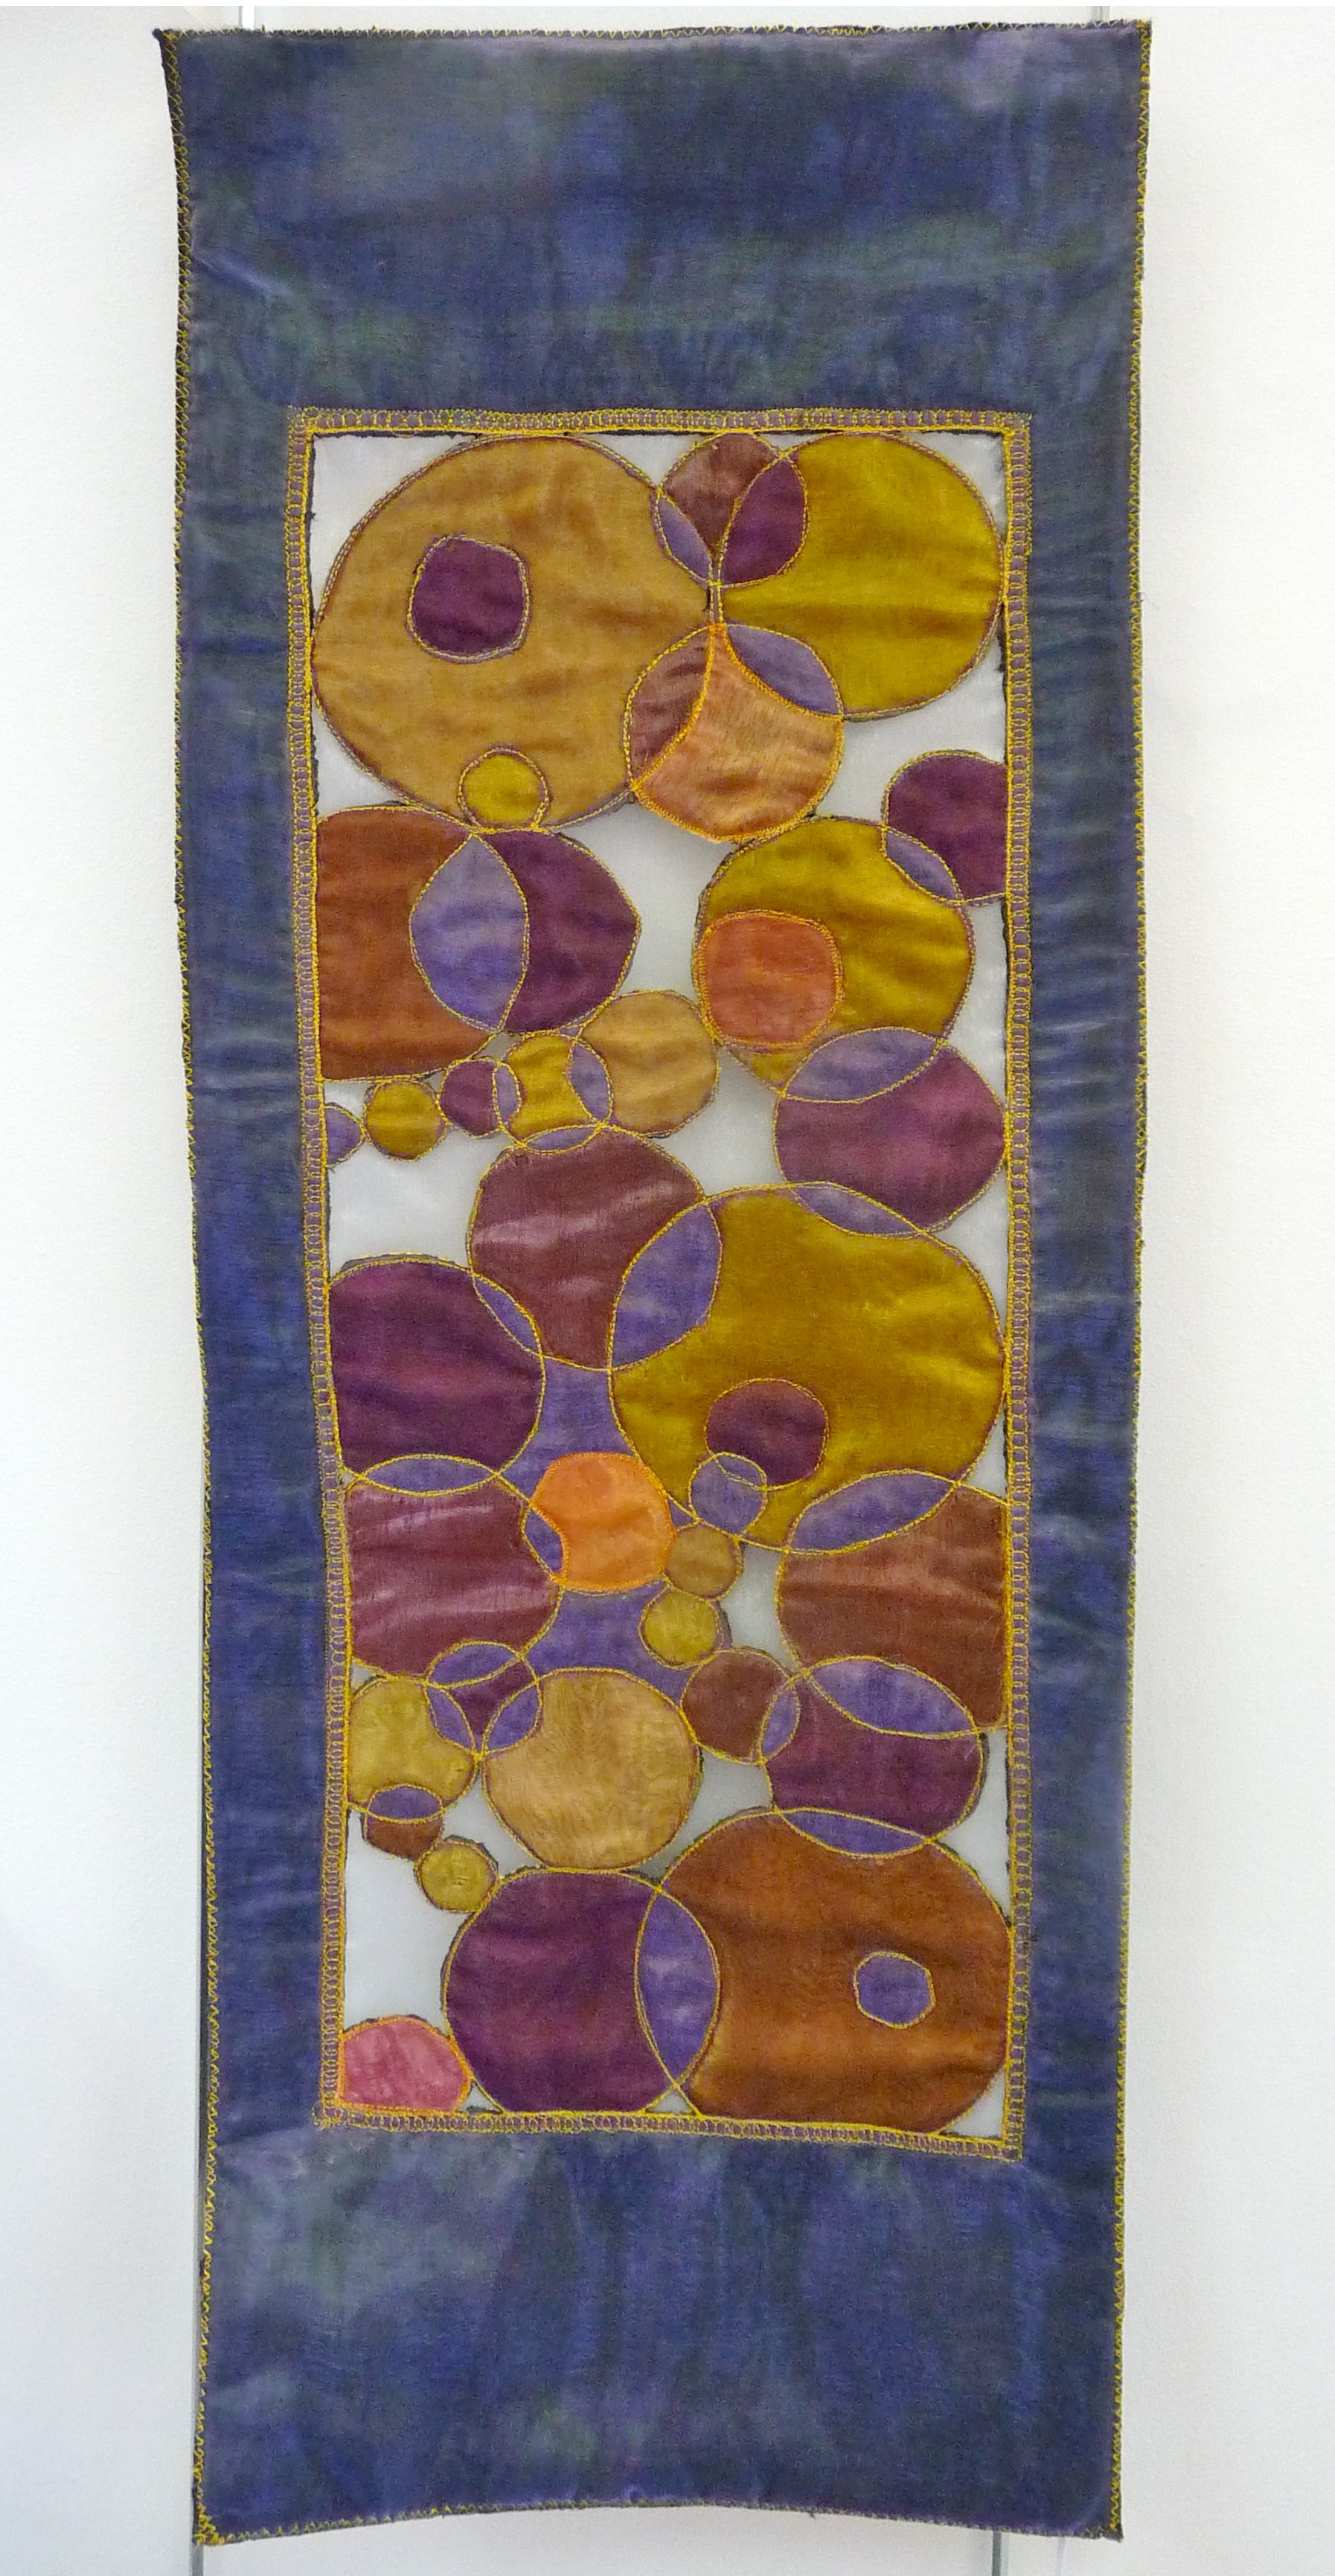 PLANETS COLLIDING by Eileen Norris, organza cutwork hanging